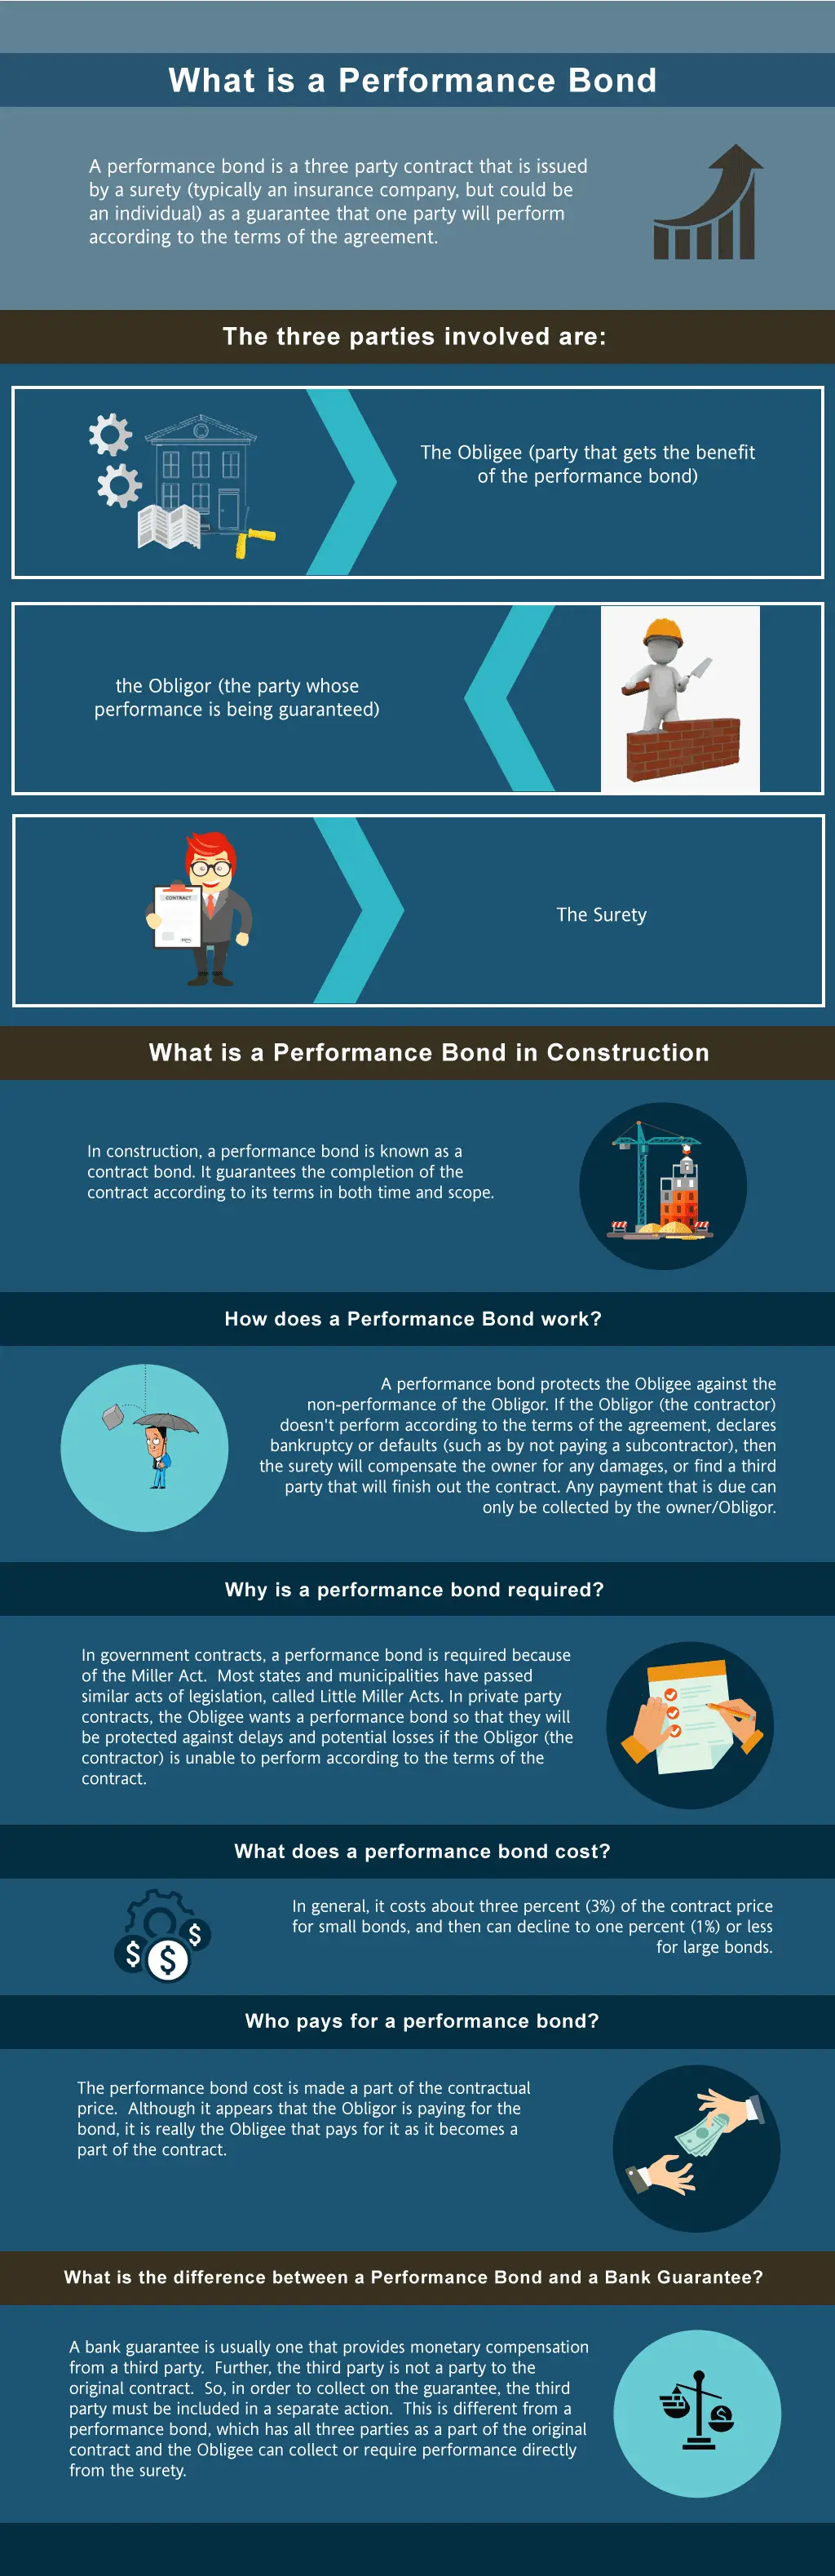 What's a performance bond? This infographic shows a logo of a house, contractor, agent holding a contract document, construction site, person holding an umbrella, dollars, signing of document, old fashioned scale in a multi colored background.